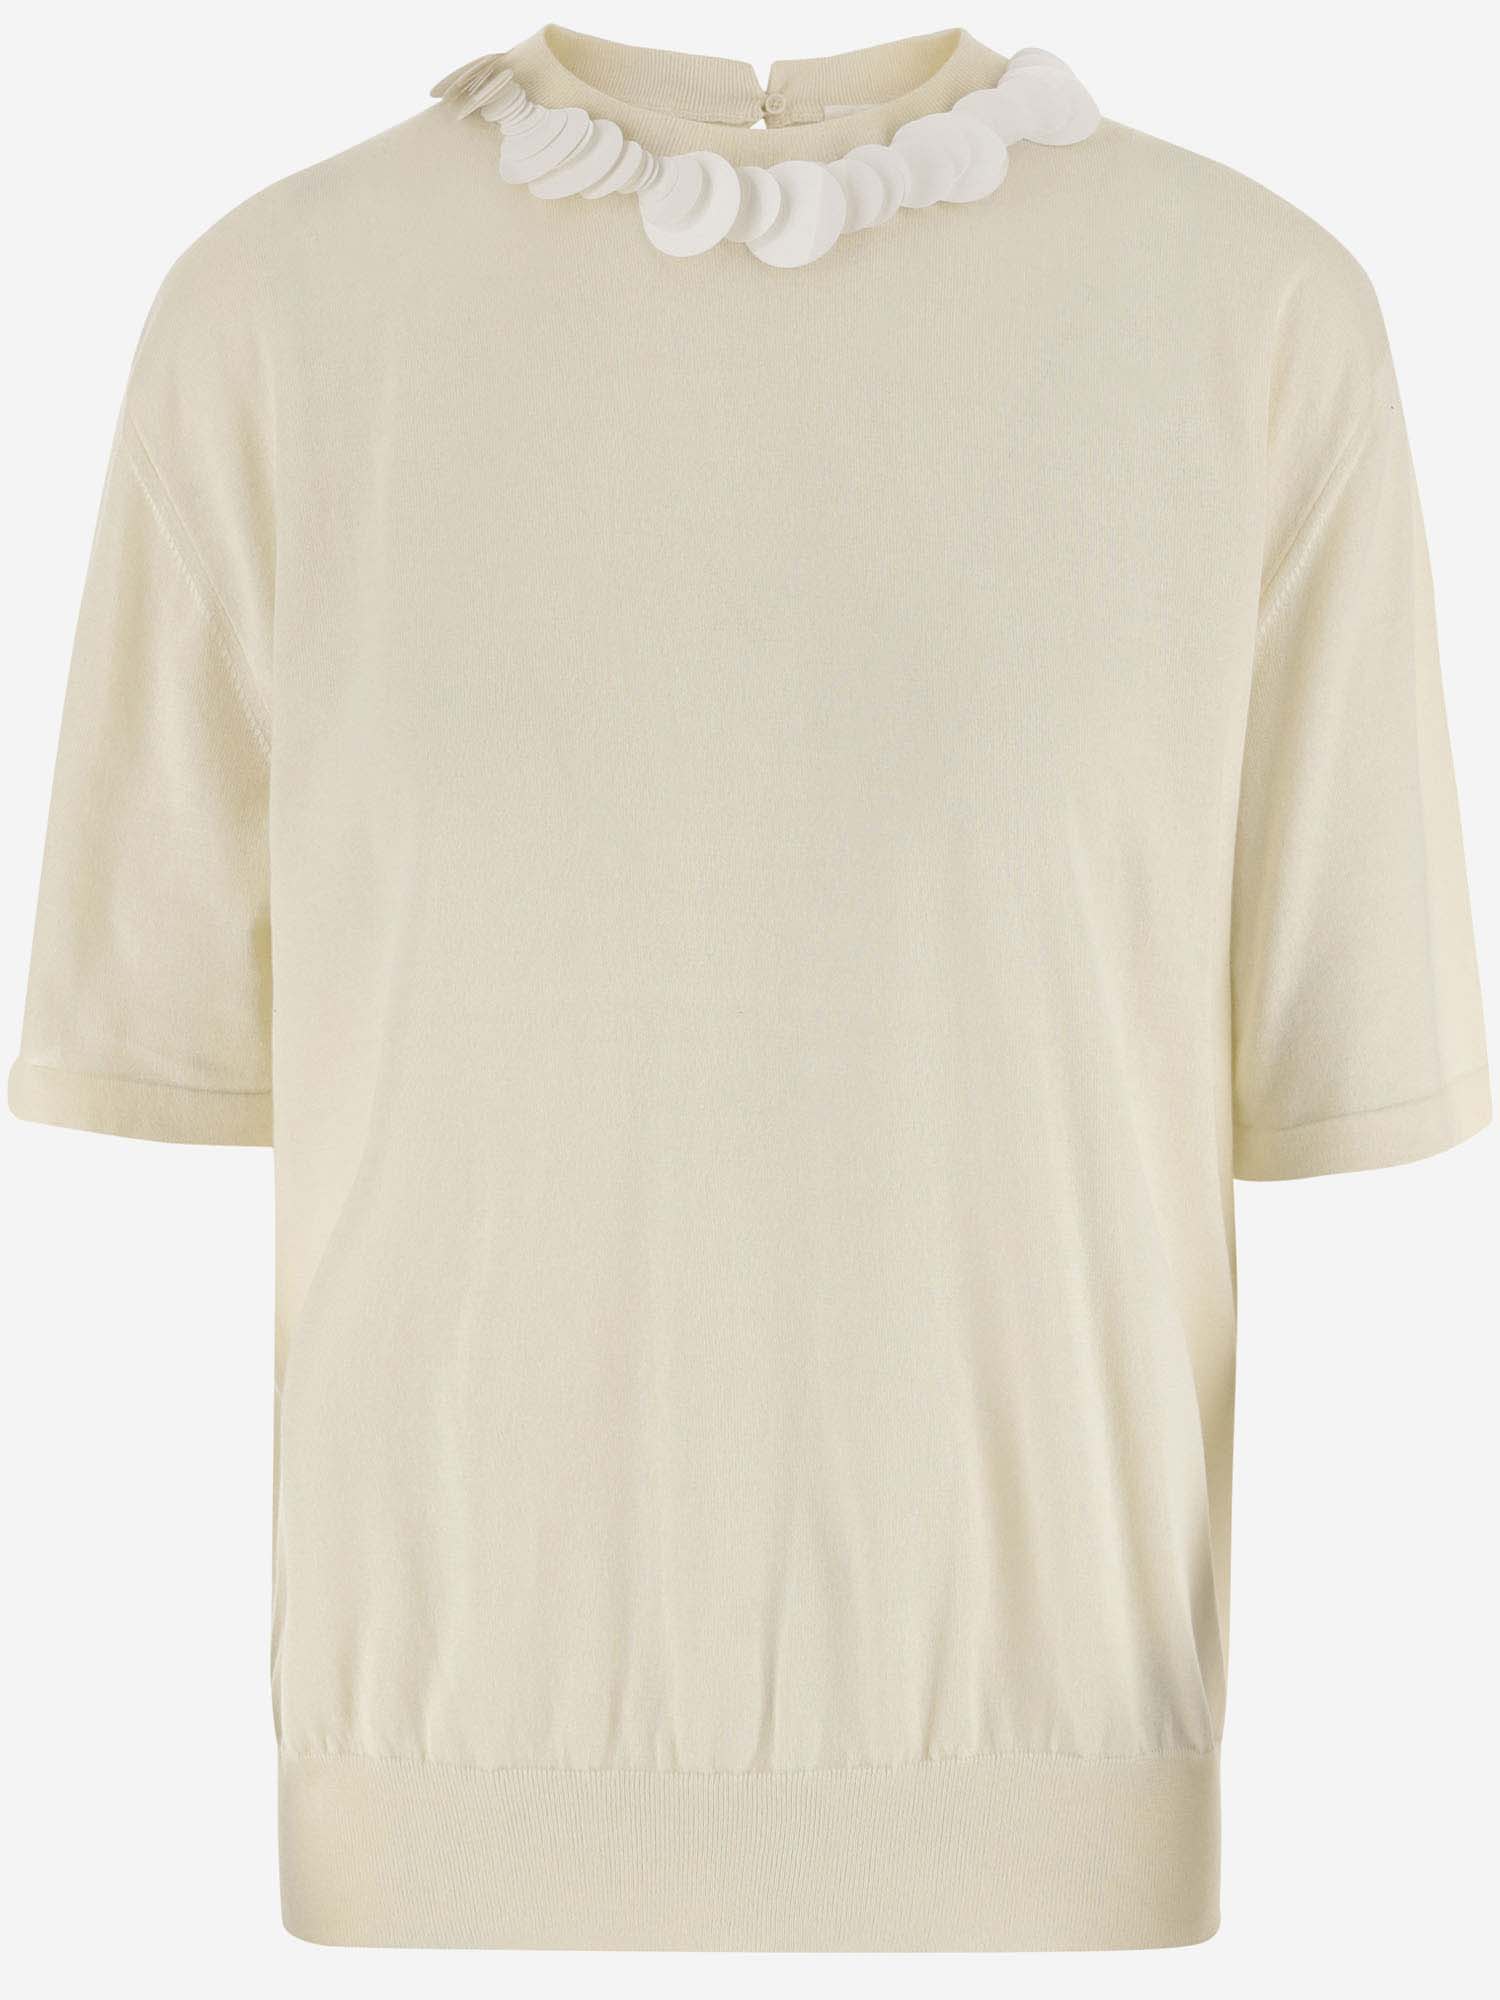 Jil Sander Sequined Cotton Knit Top In Ivory